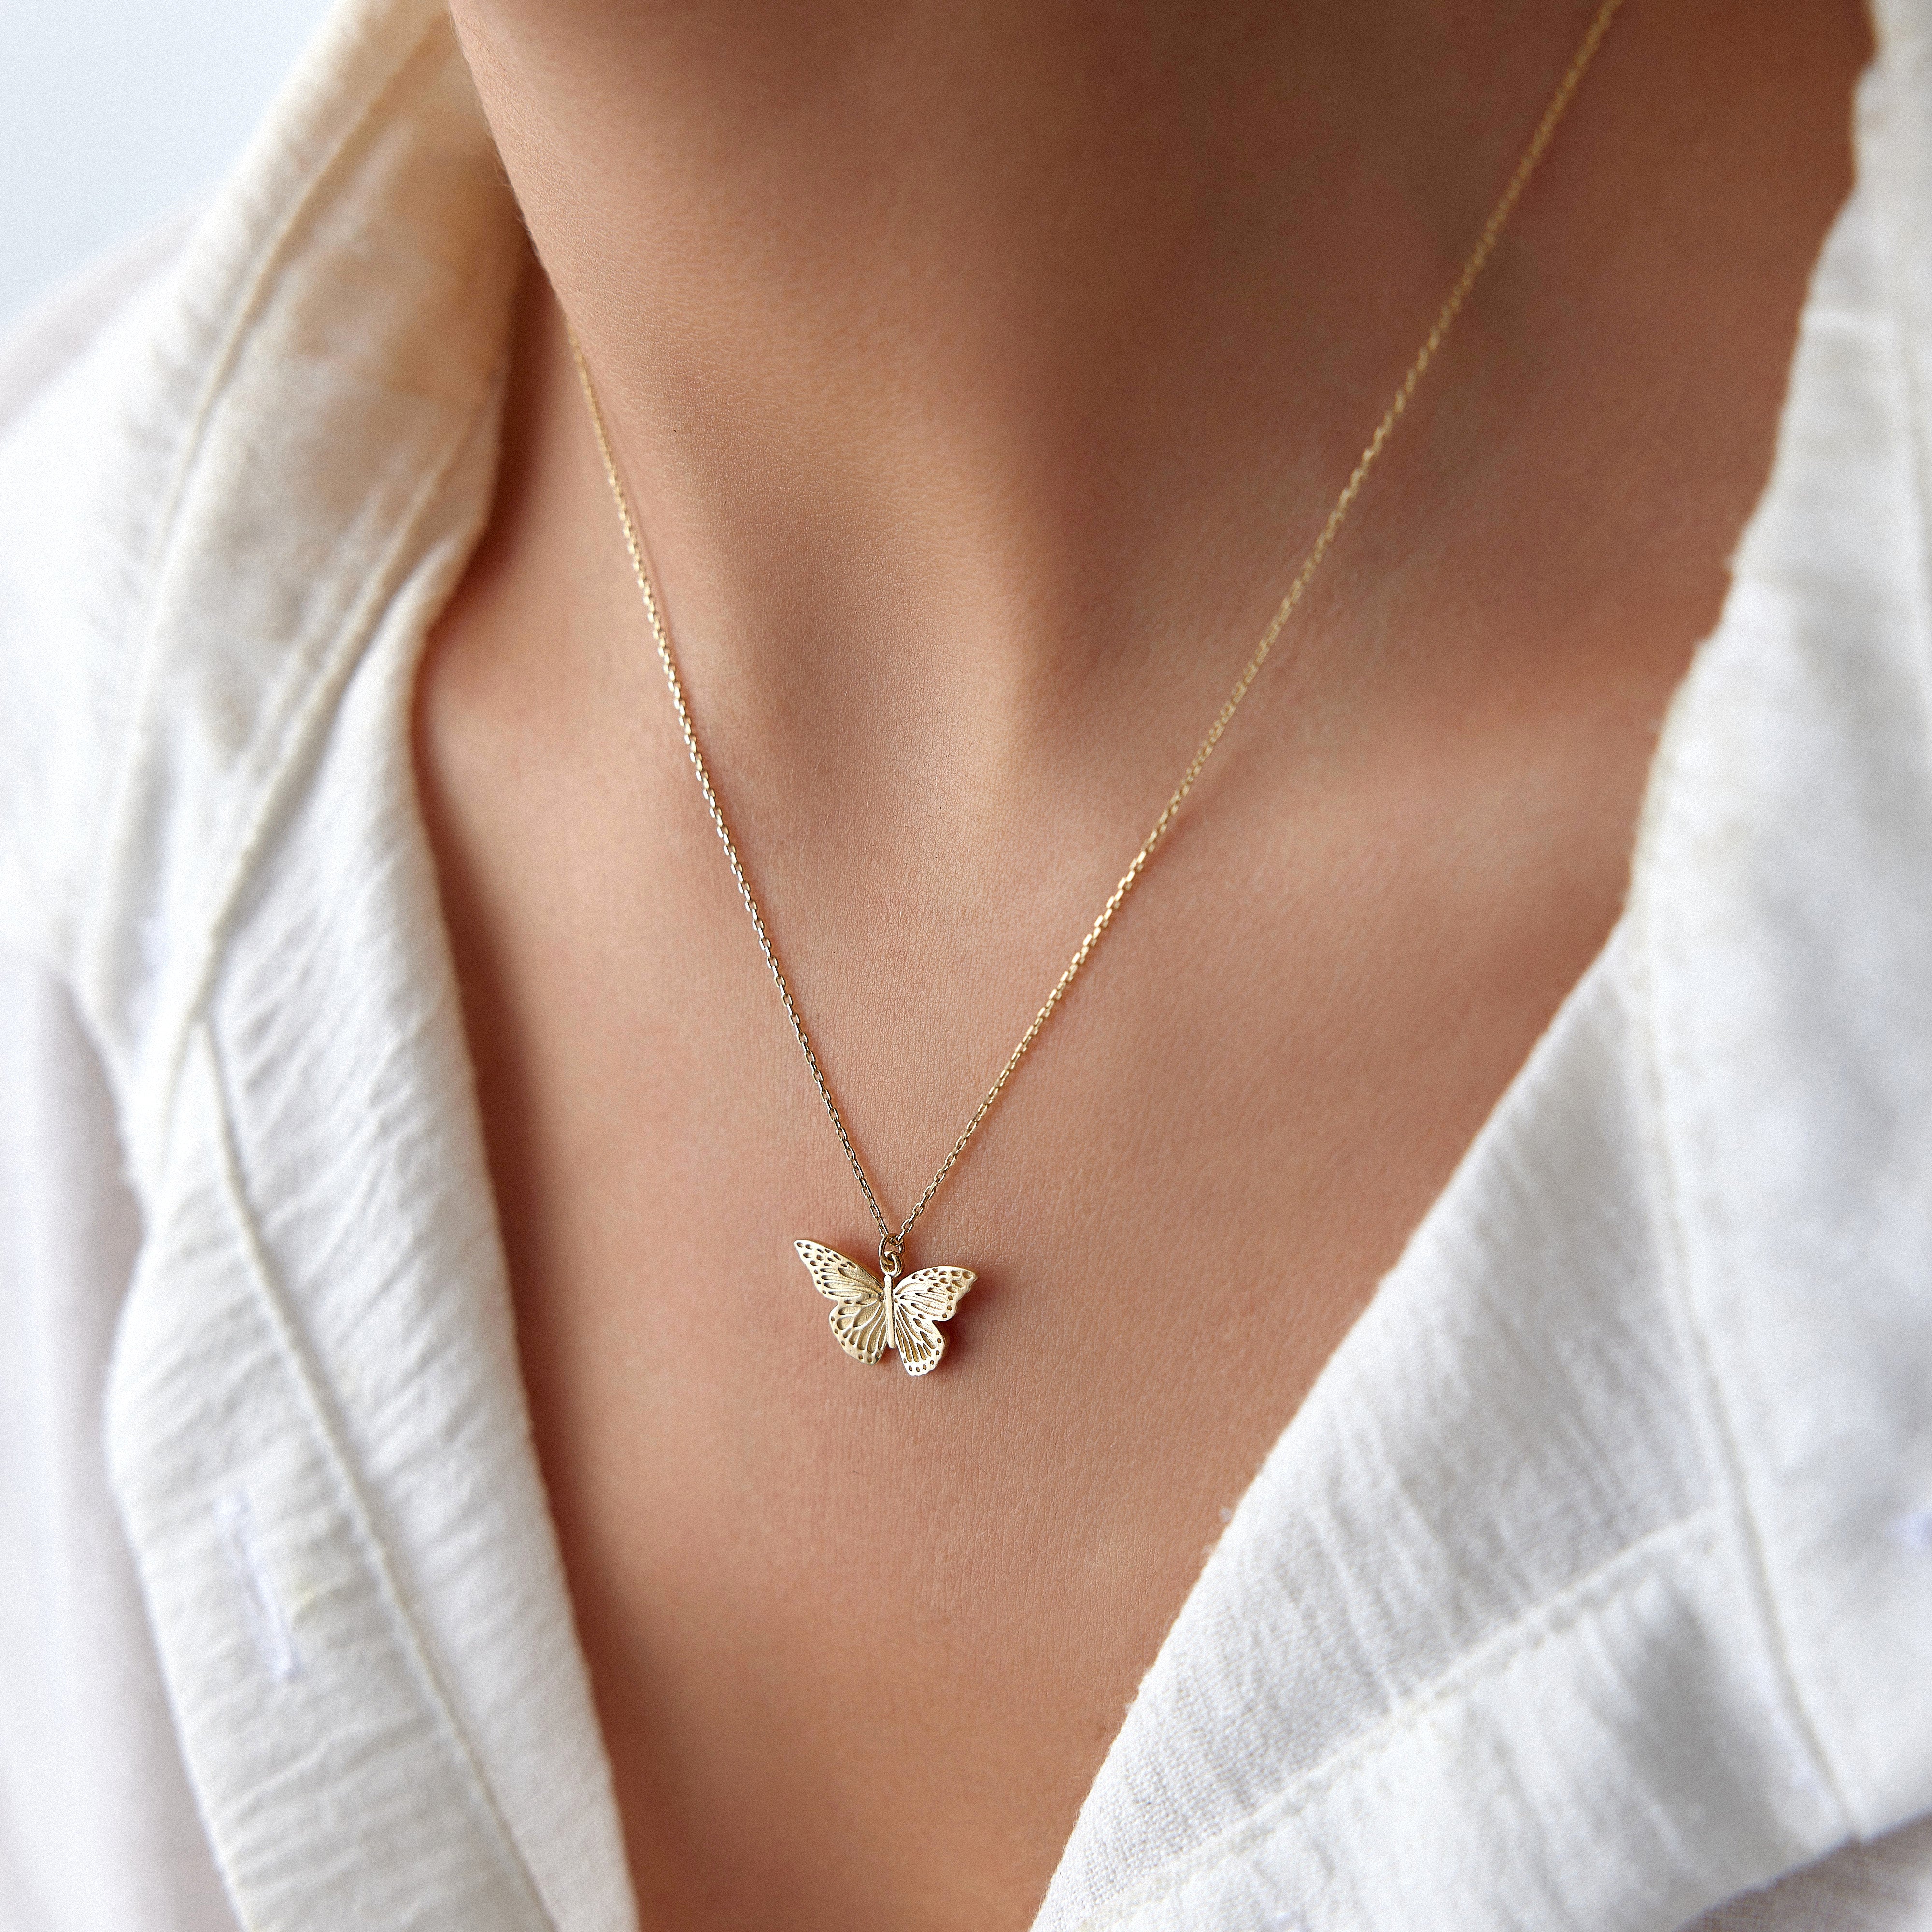 Butterfly Necklace in 14K Gold